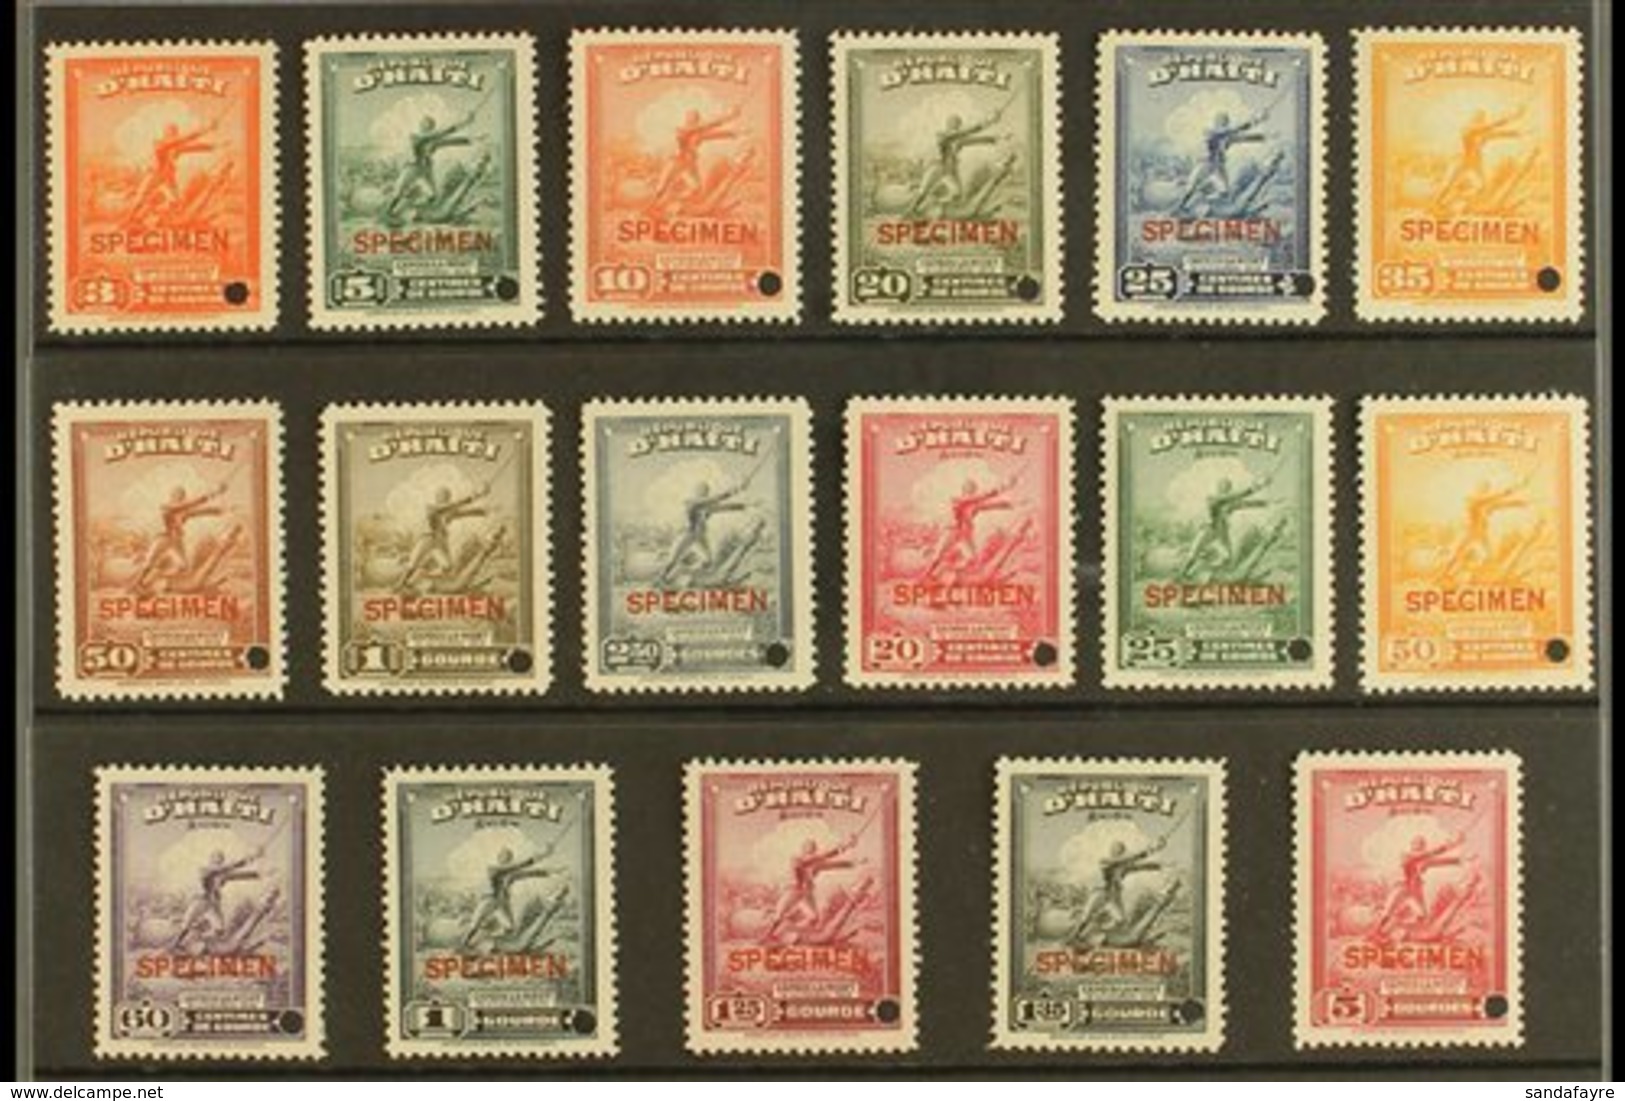 1946 "Capois-la-Mort" Postage And Air Complete Set, SG 400/16, Overprinted "SPECIMEN" And With Security Punch Hole, Neve - Haiti